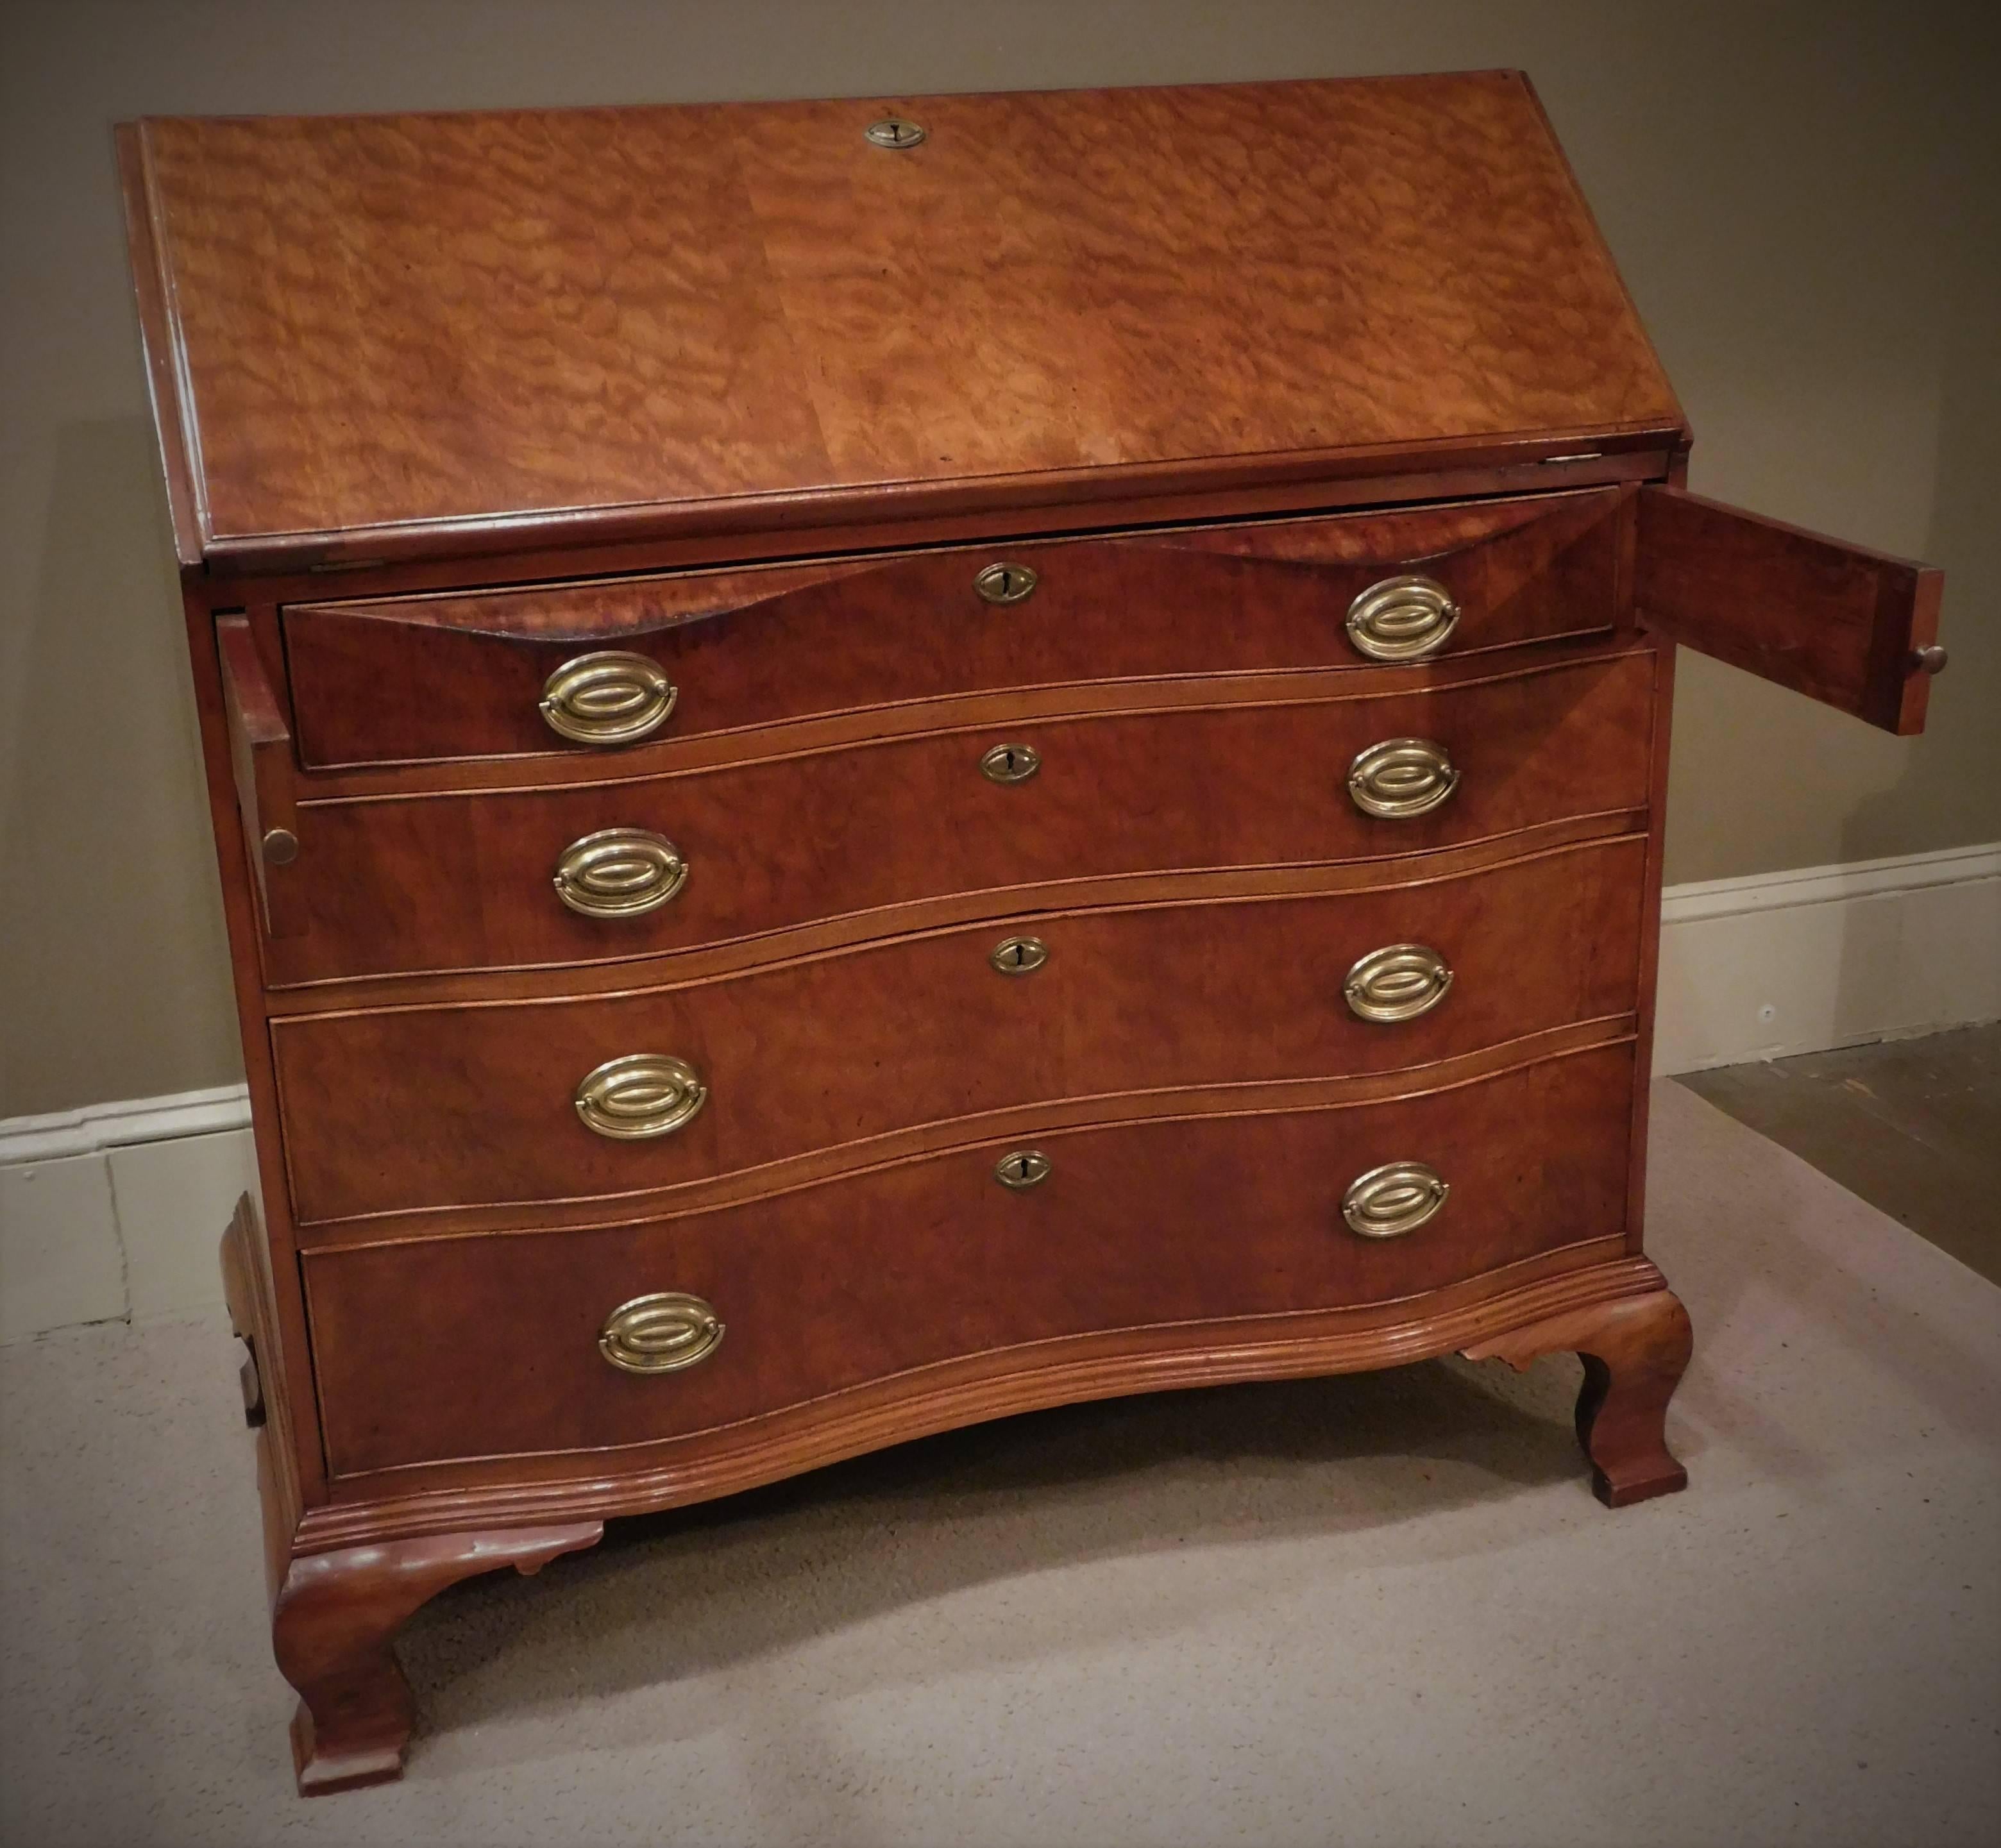 Pollarded Walnut Oxbow Chippendale Fall-Front Desk, Massachusetts, circa 1780 In Excellent Condition For Sale In Alexandria, VA